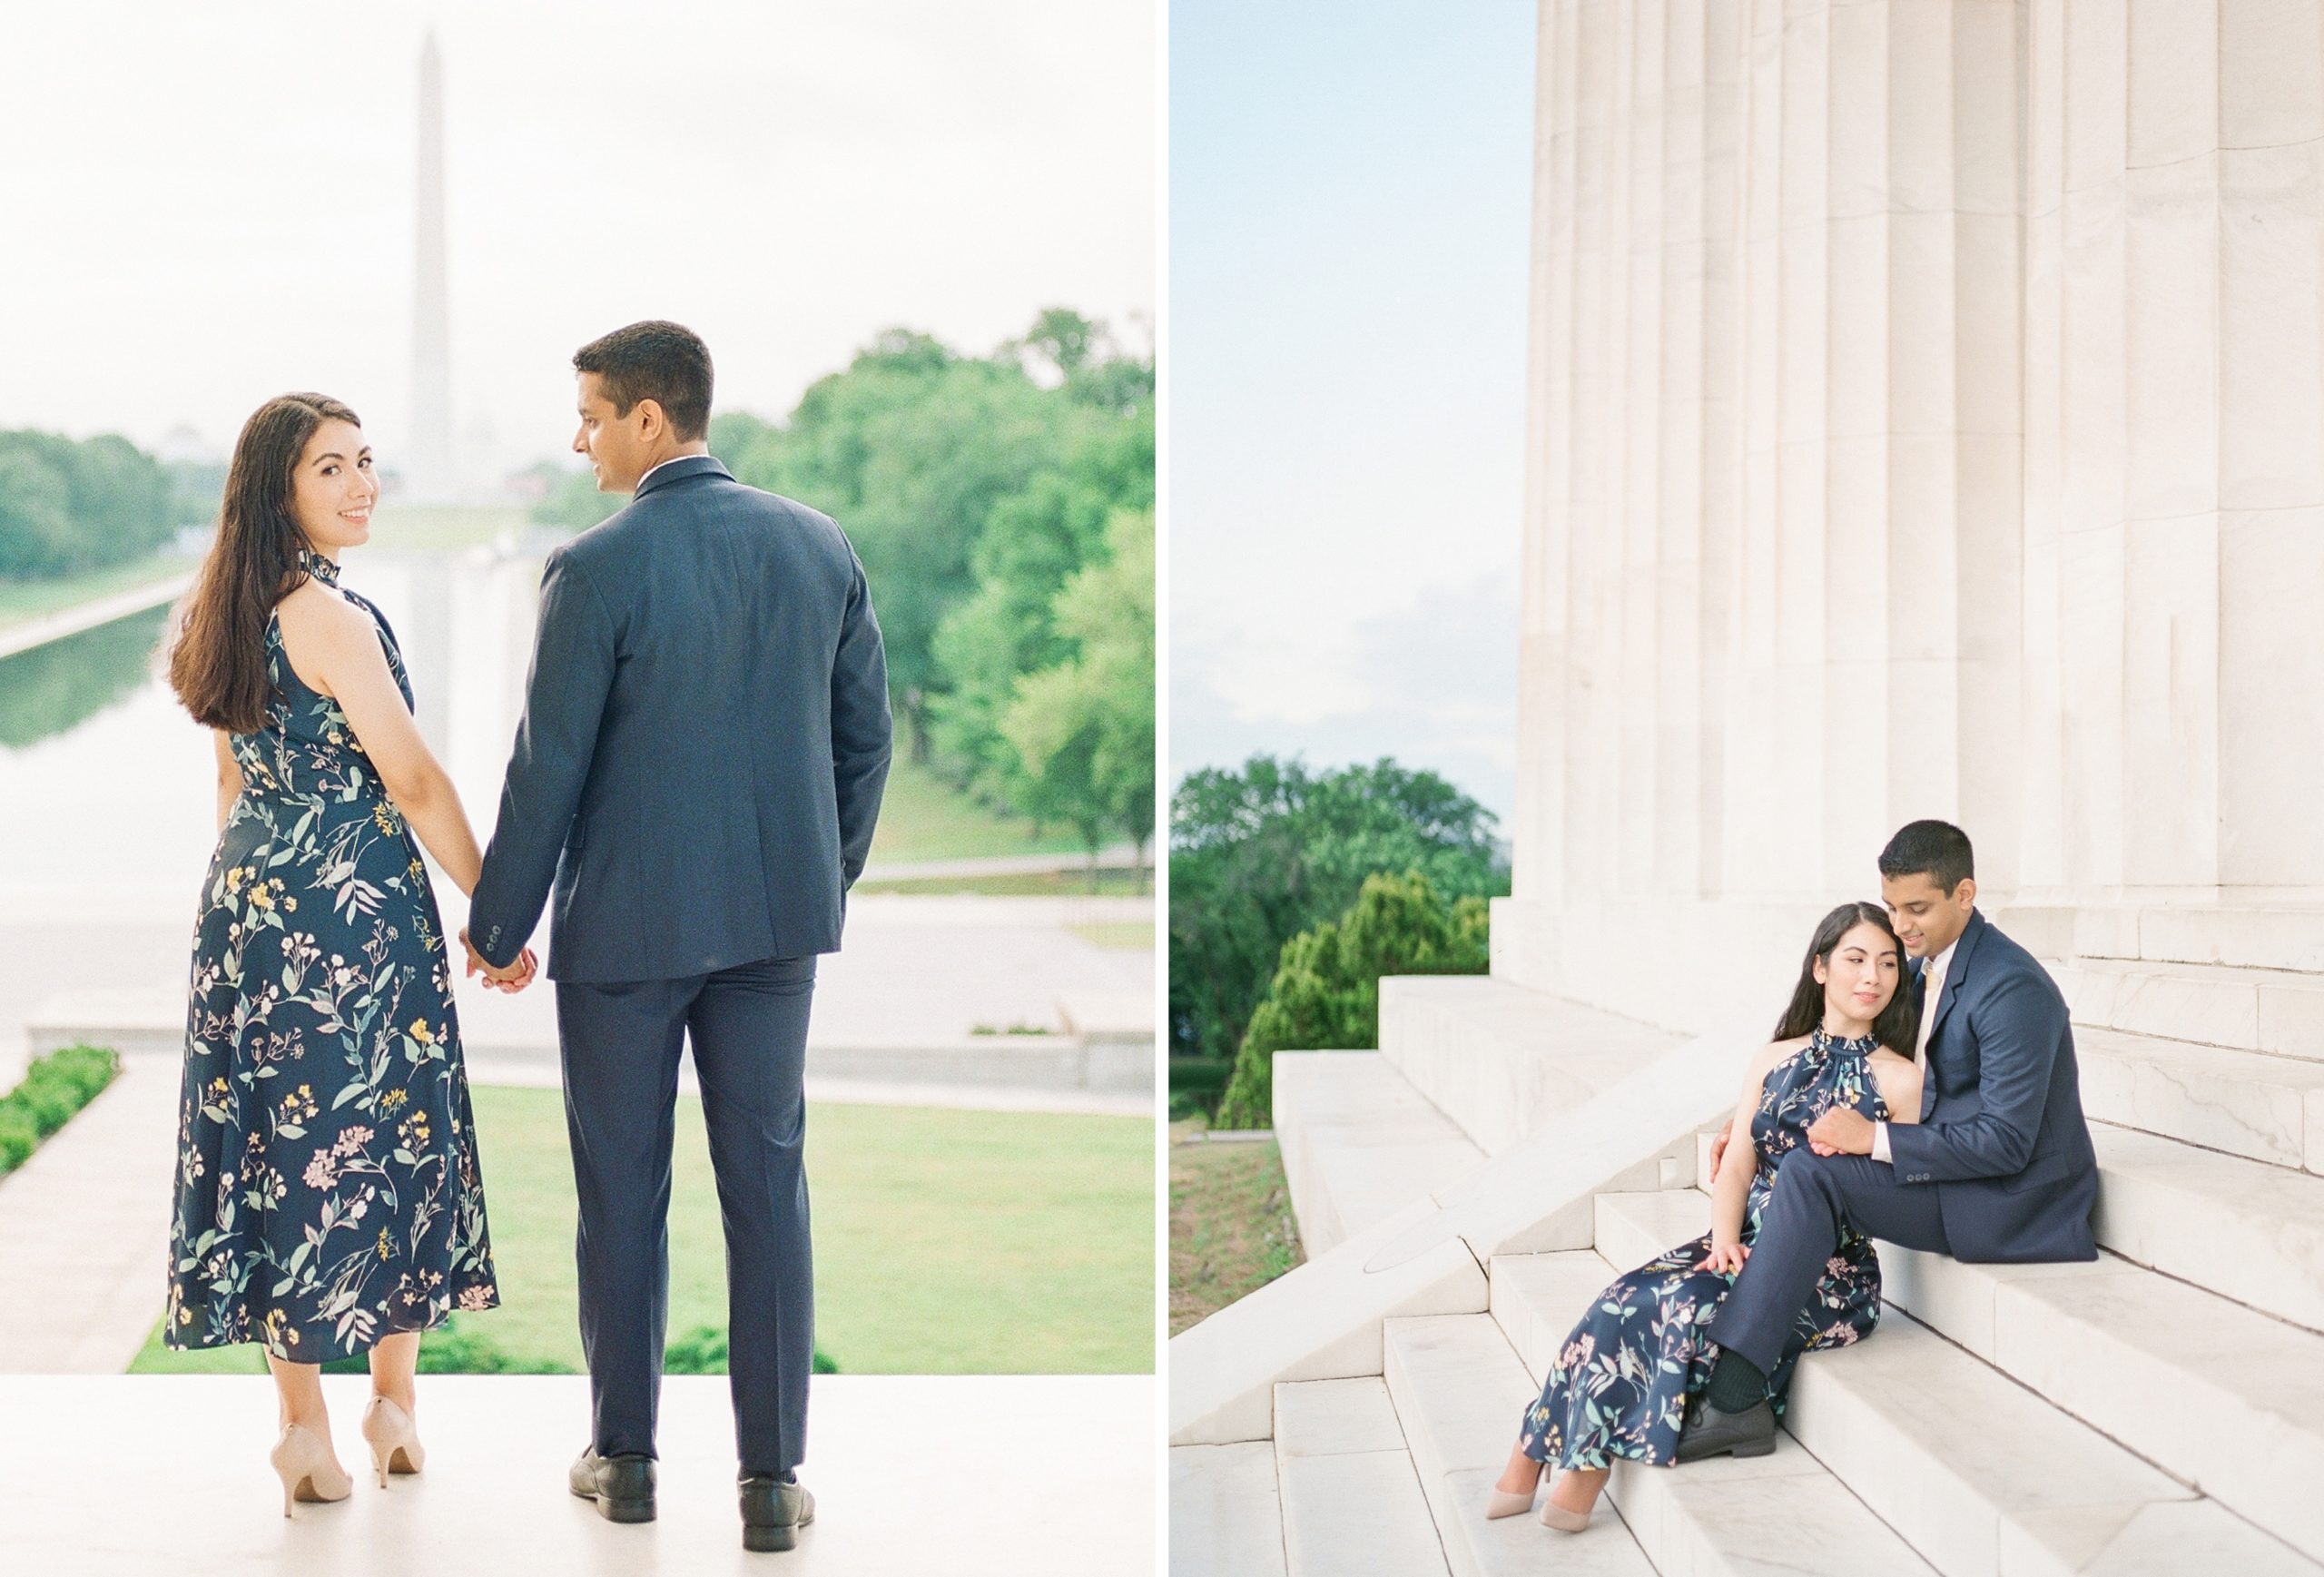 A sunrise engagement session in Washington, DC at the Lincoln Memorial, Reflecting Pool, and DC War Memorial. Captured by film photographer, Alicia Lacey.